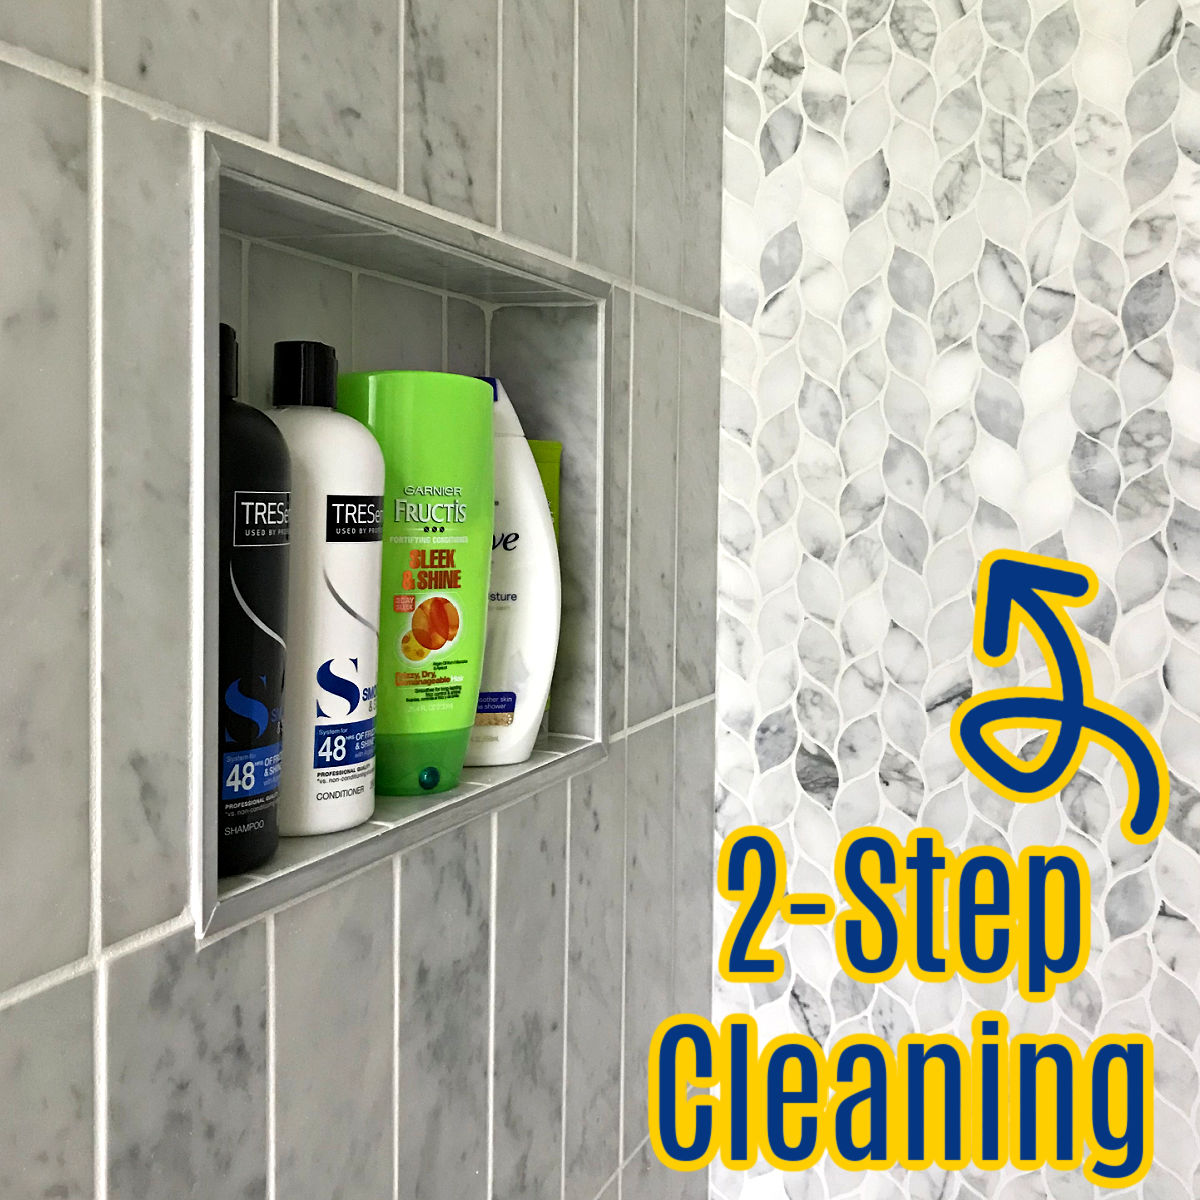 This $26 Grout Cleaner Makes Scrubbing Tiles Easier